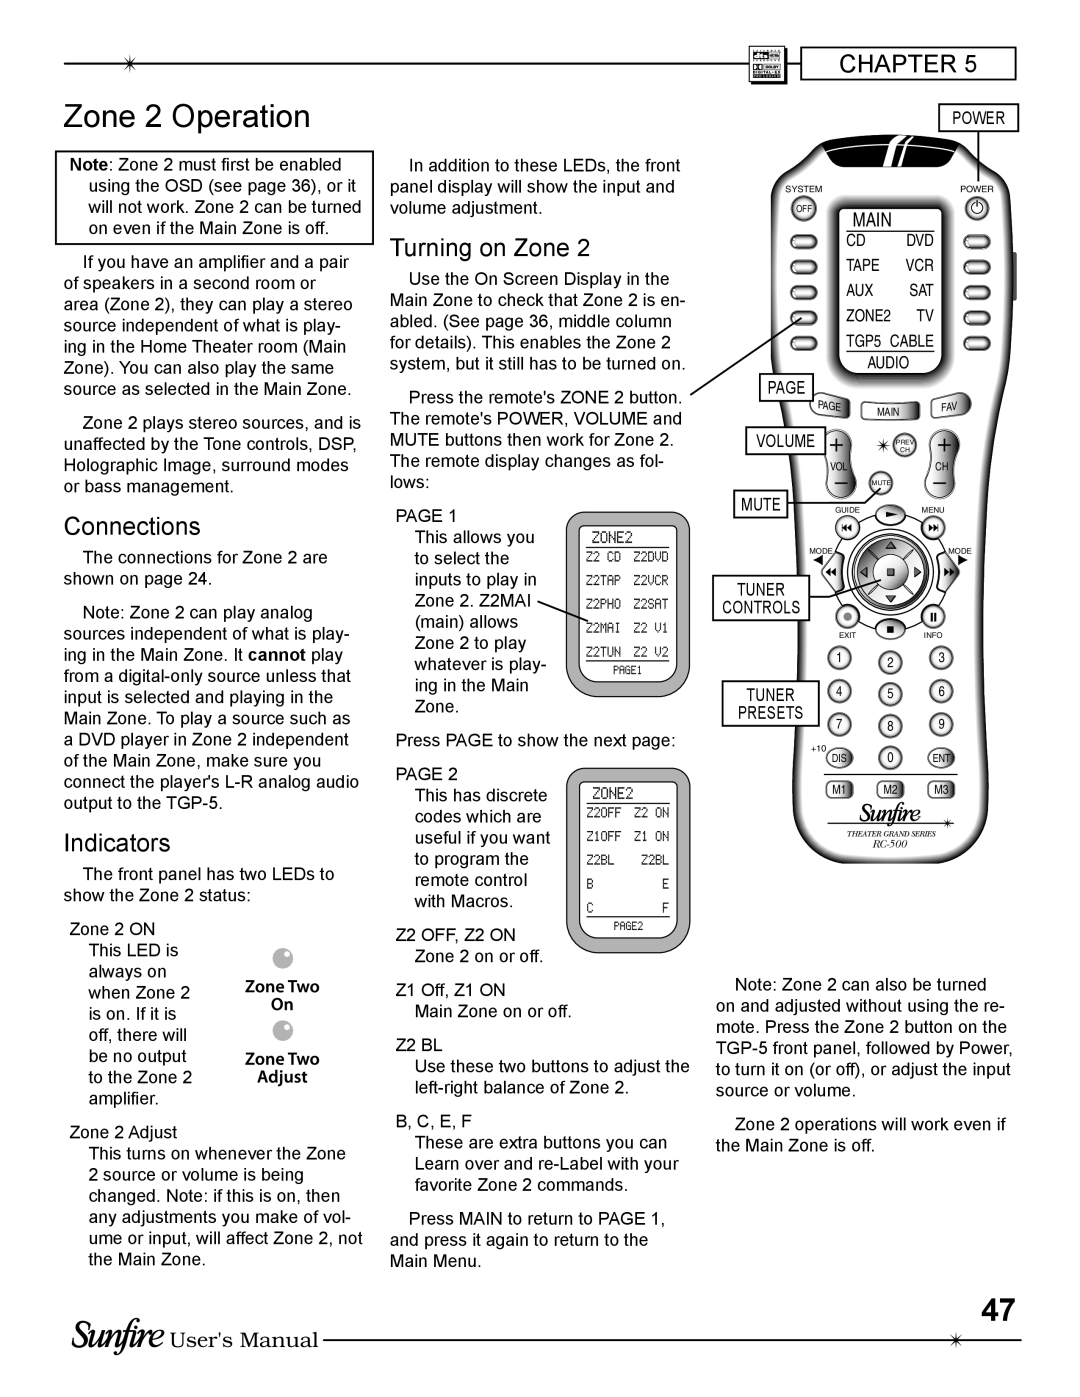 Sunfire TGP-5(E) manual Zone 2 Operation, Connections, Indicators, Turning on Zone, Chapter, Users Manual, Main 